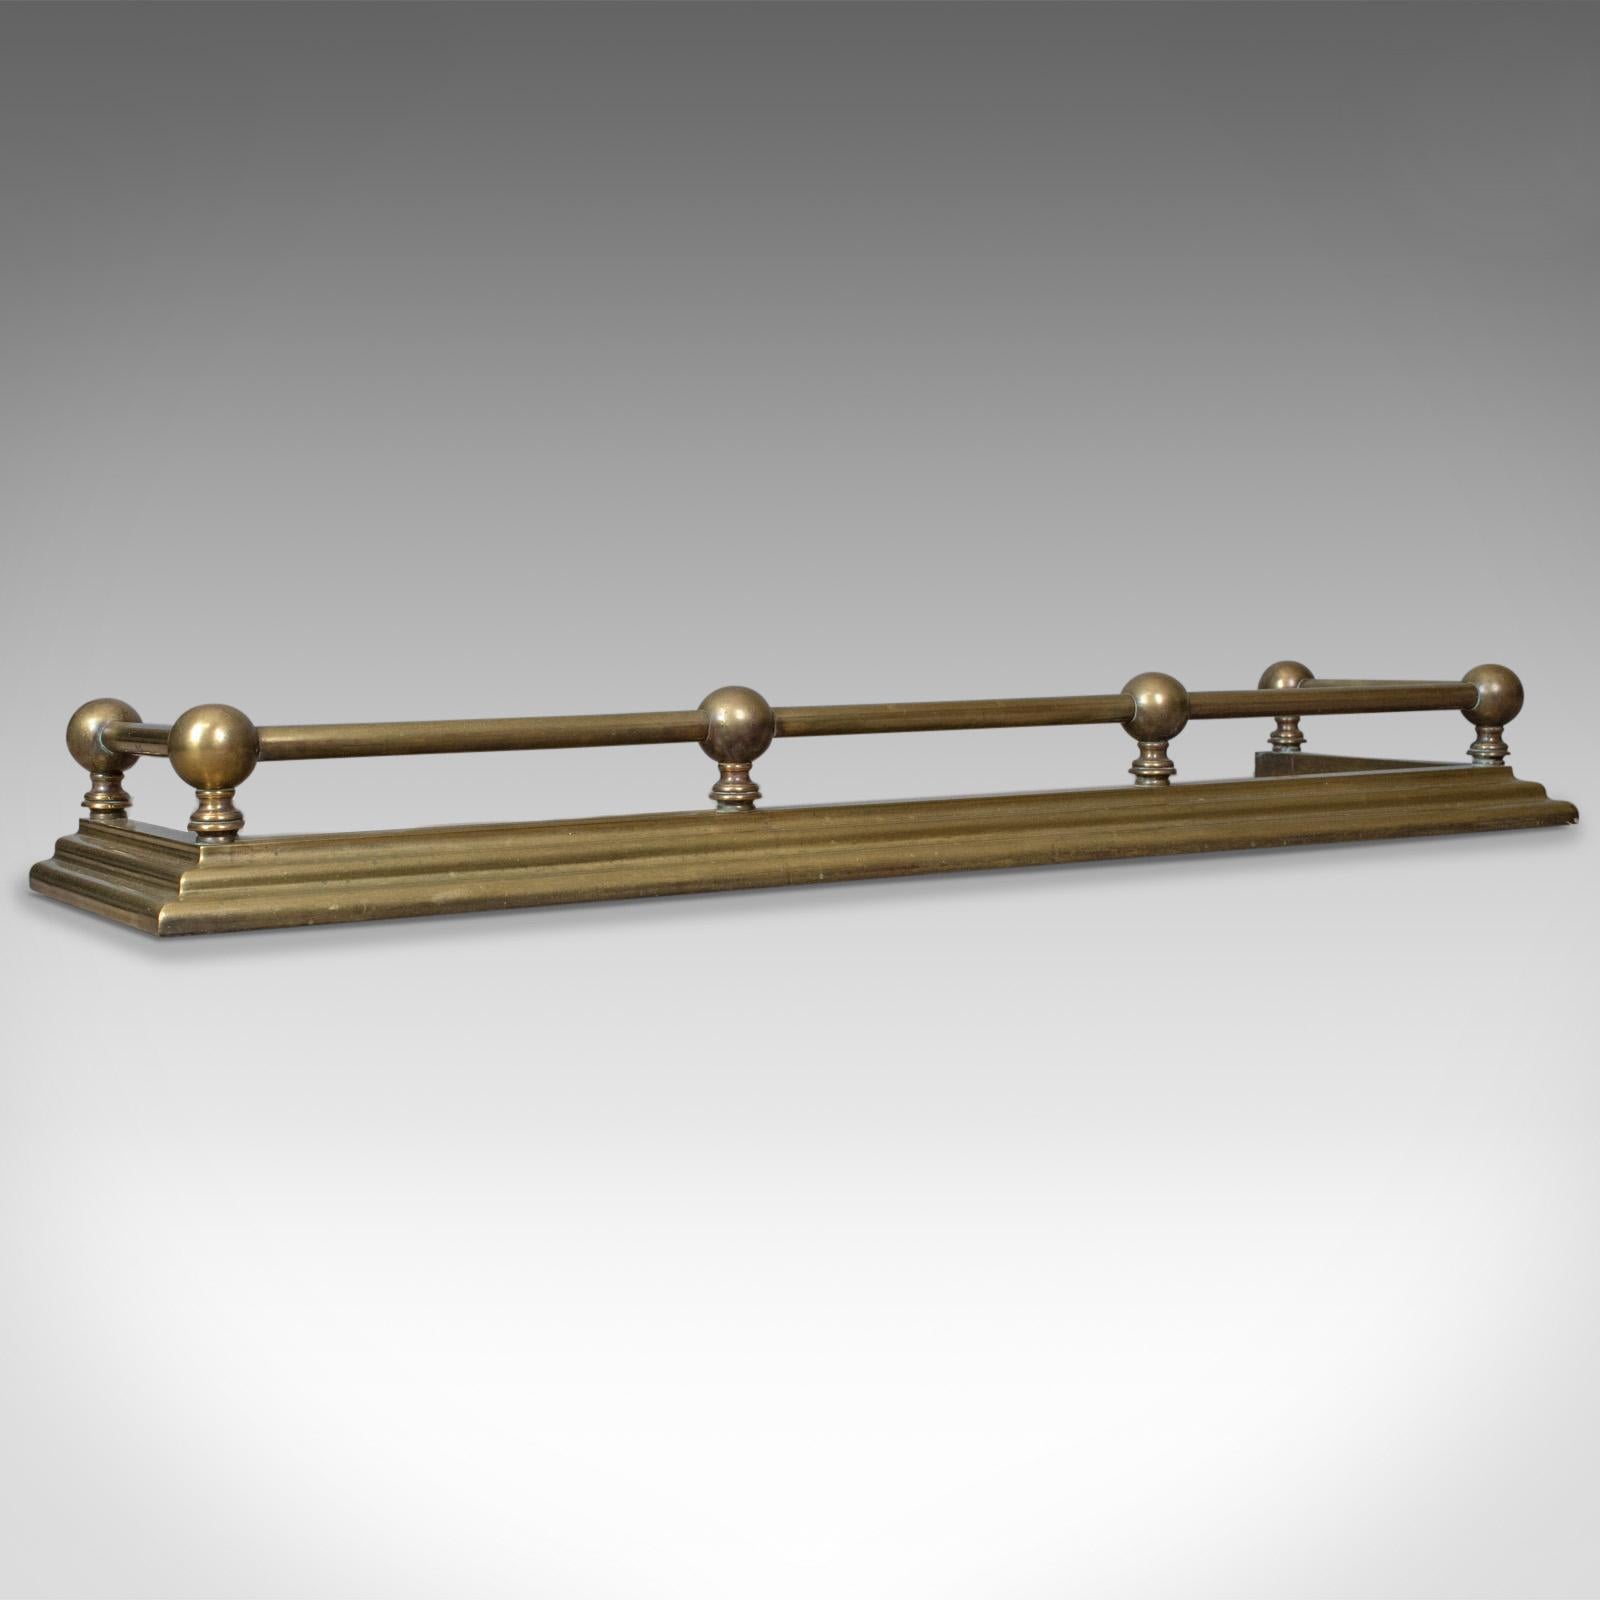 This is an antique brass fire kerb, Victorian fireside fender, English, Victorian, circa 1900.

Attractive fire kerb with classical overtones
The brass mellowed with an aged patina
Stepped plinth rises to gallery
Gallery bar supported by six